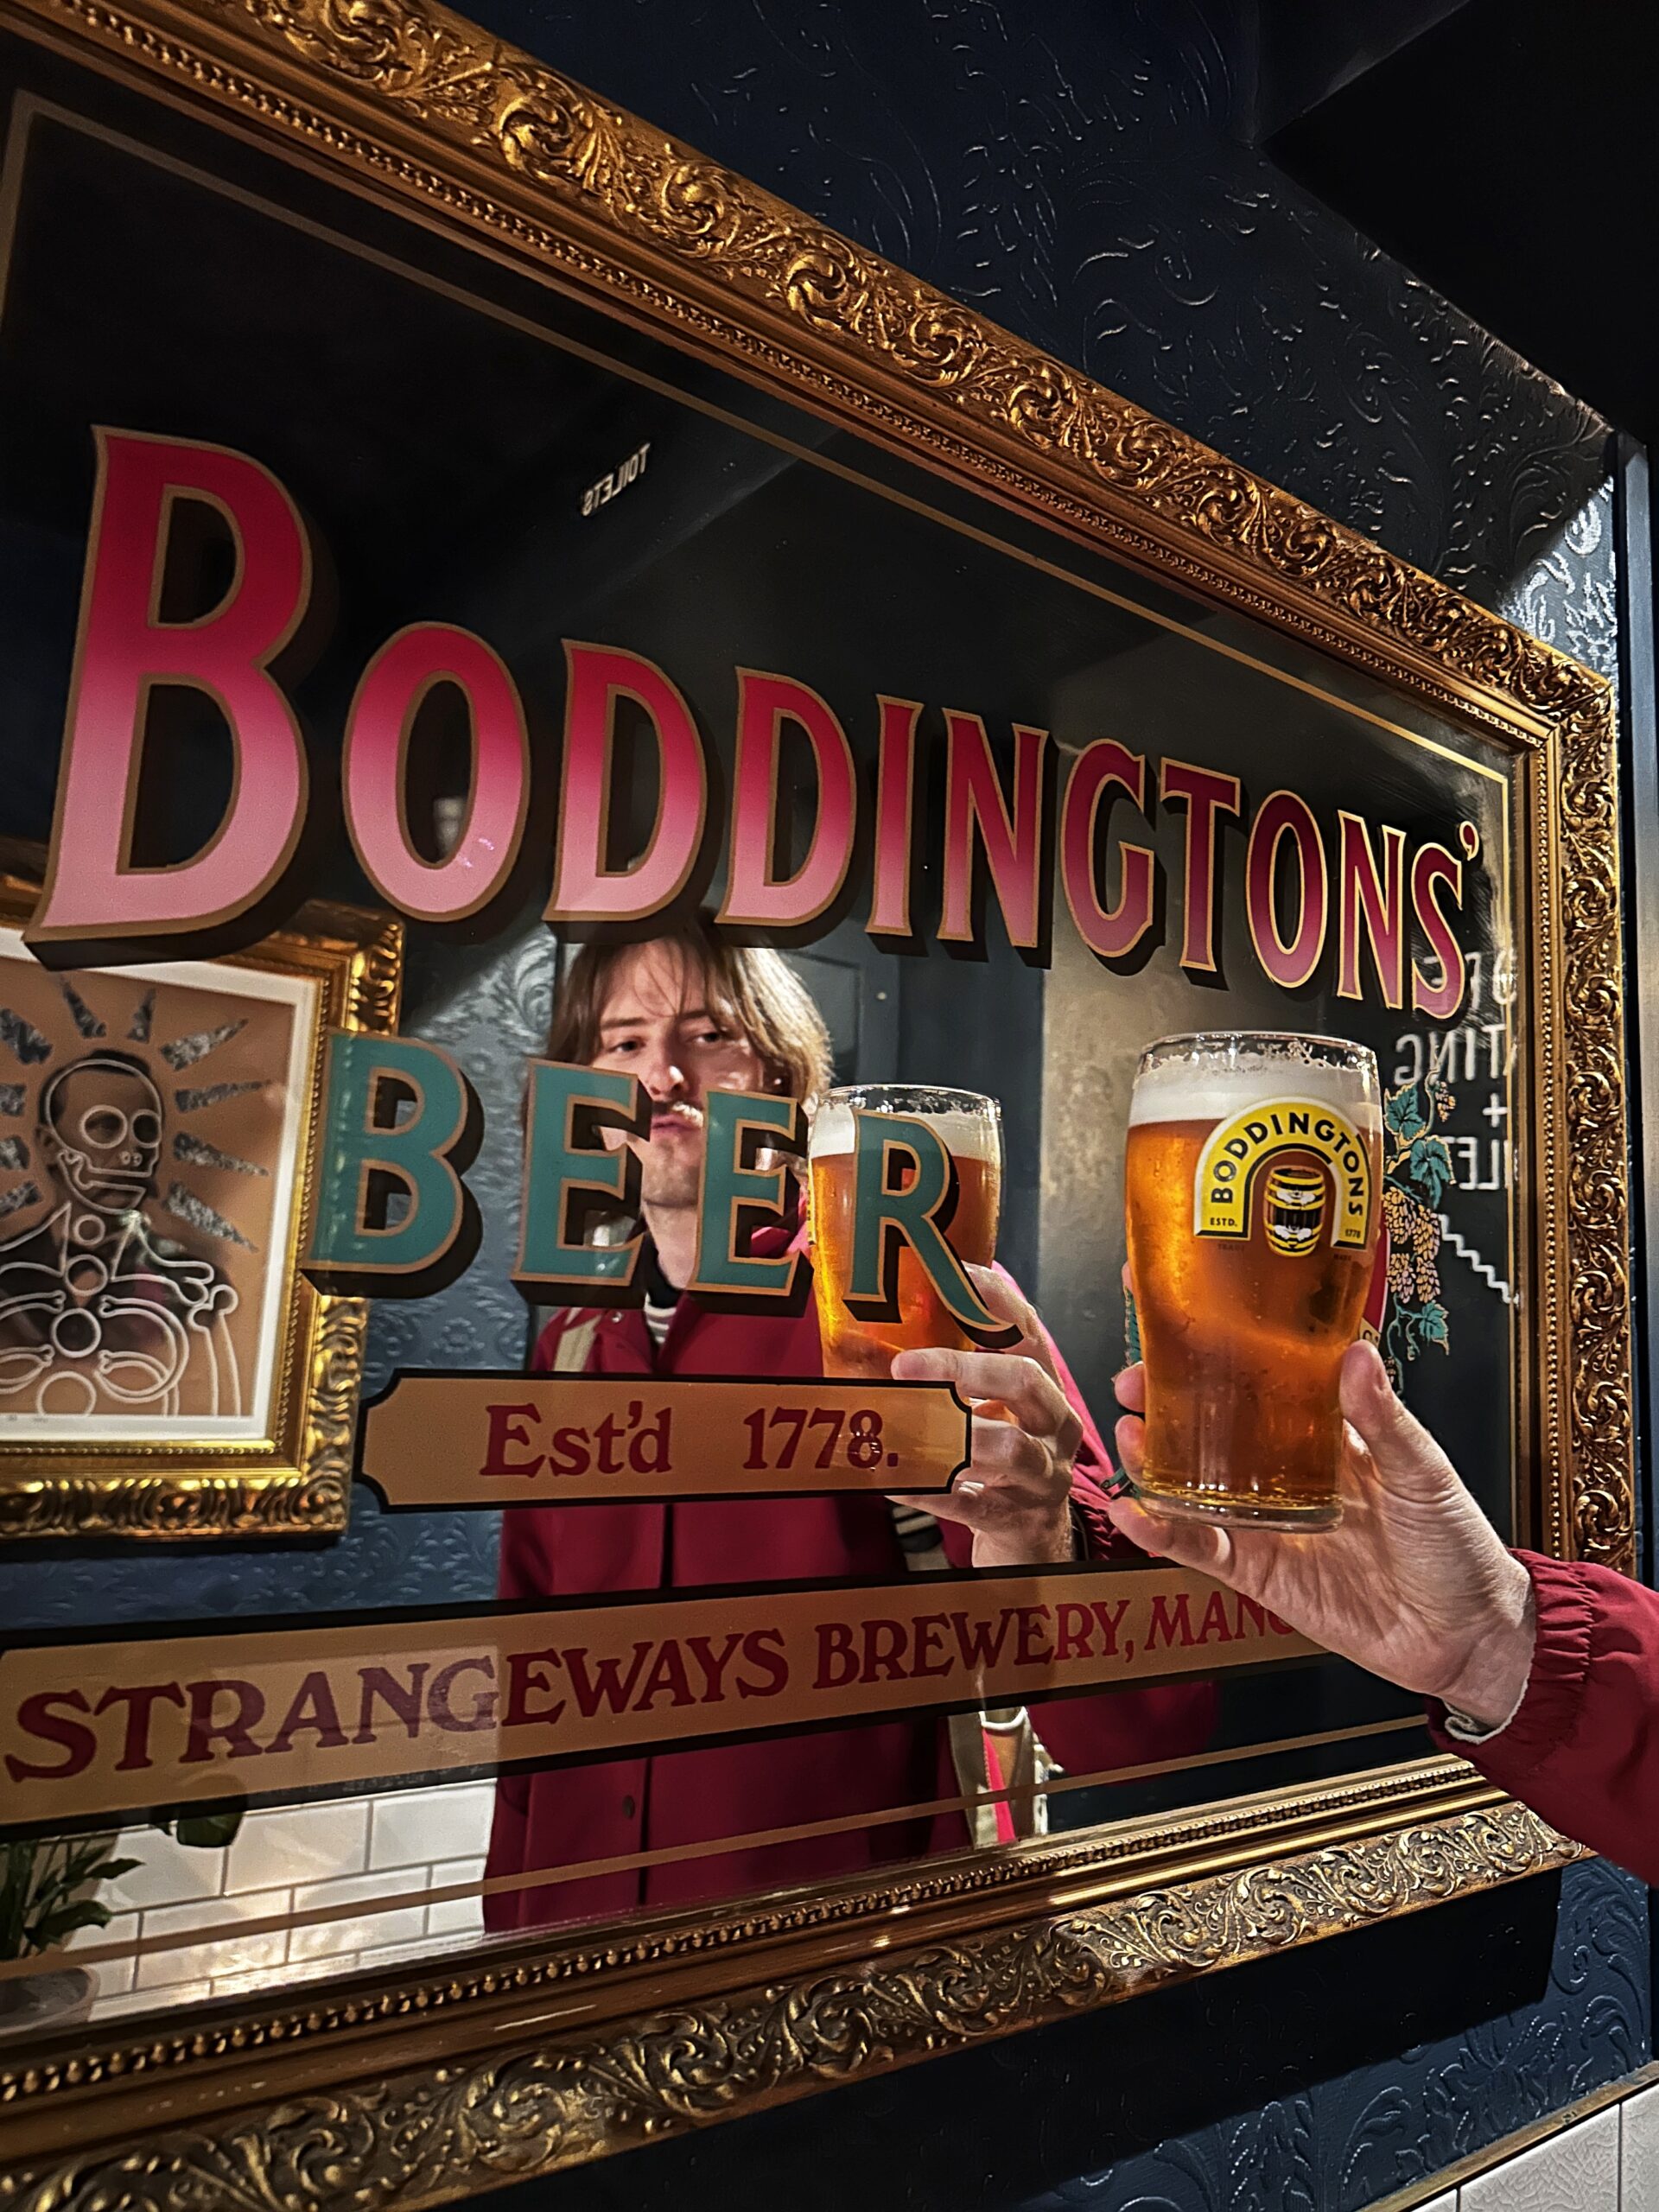 The Bay Horse Tavern in Manchester still has Boddingtons on tap